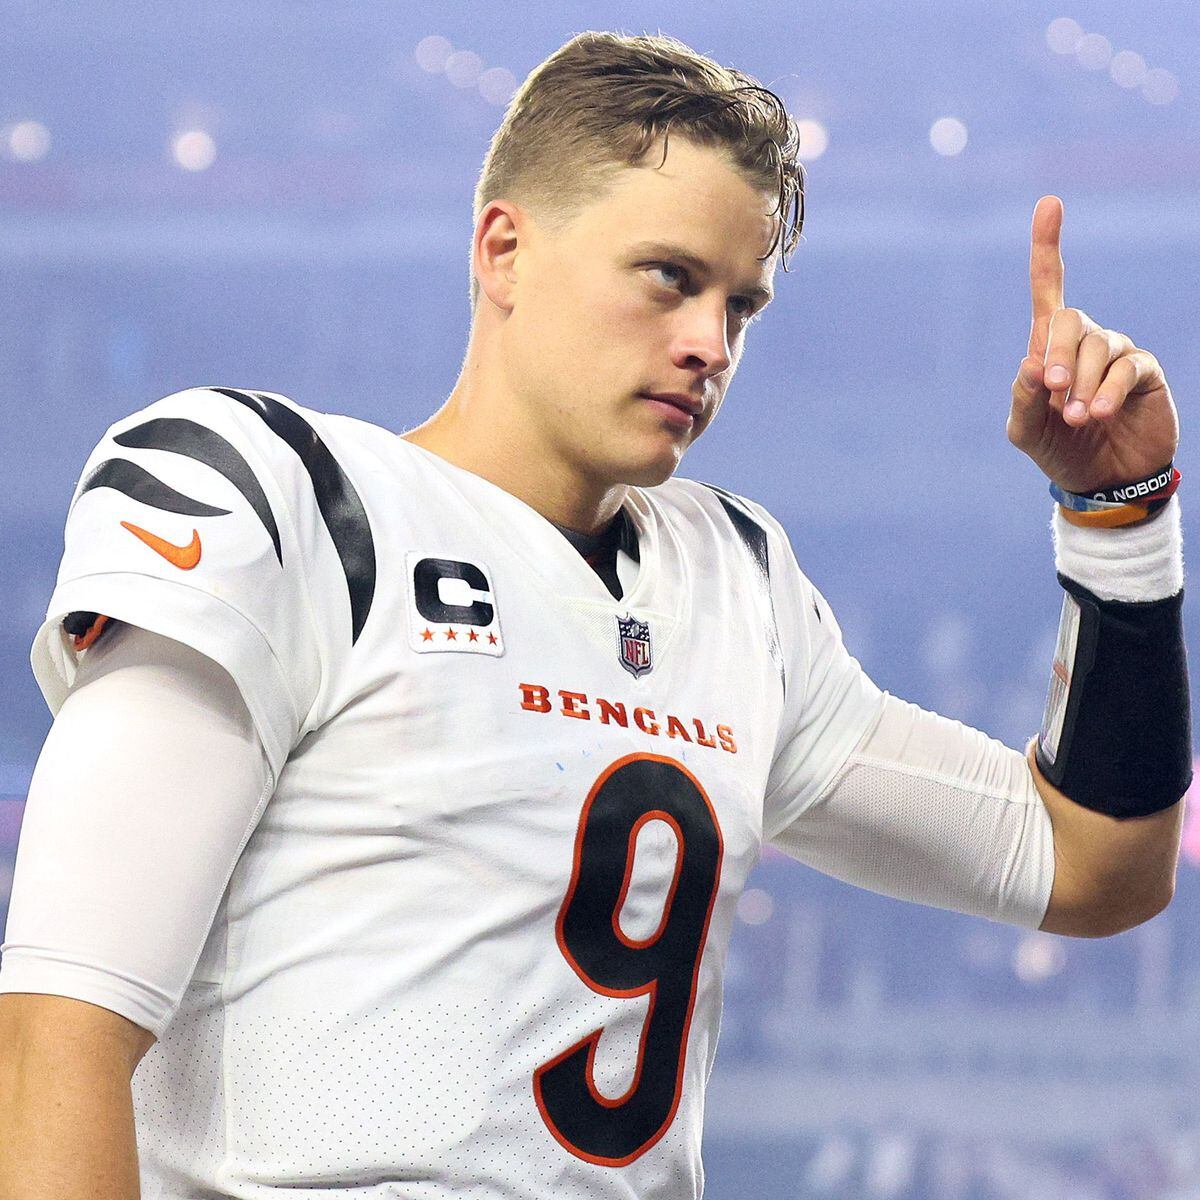 Bengals' Joe Burrow becomes the highest-paid player in NFL history - Los  Angeles Times